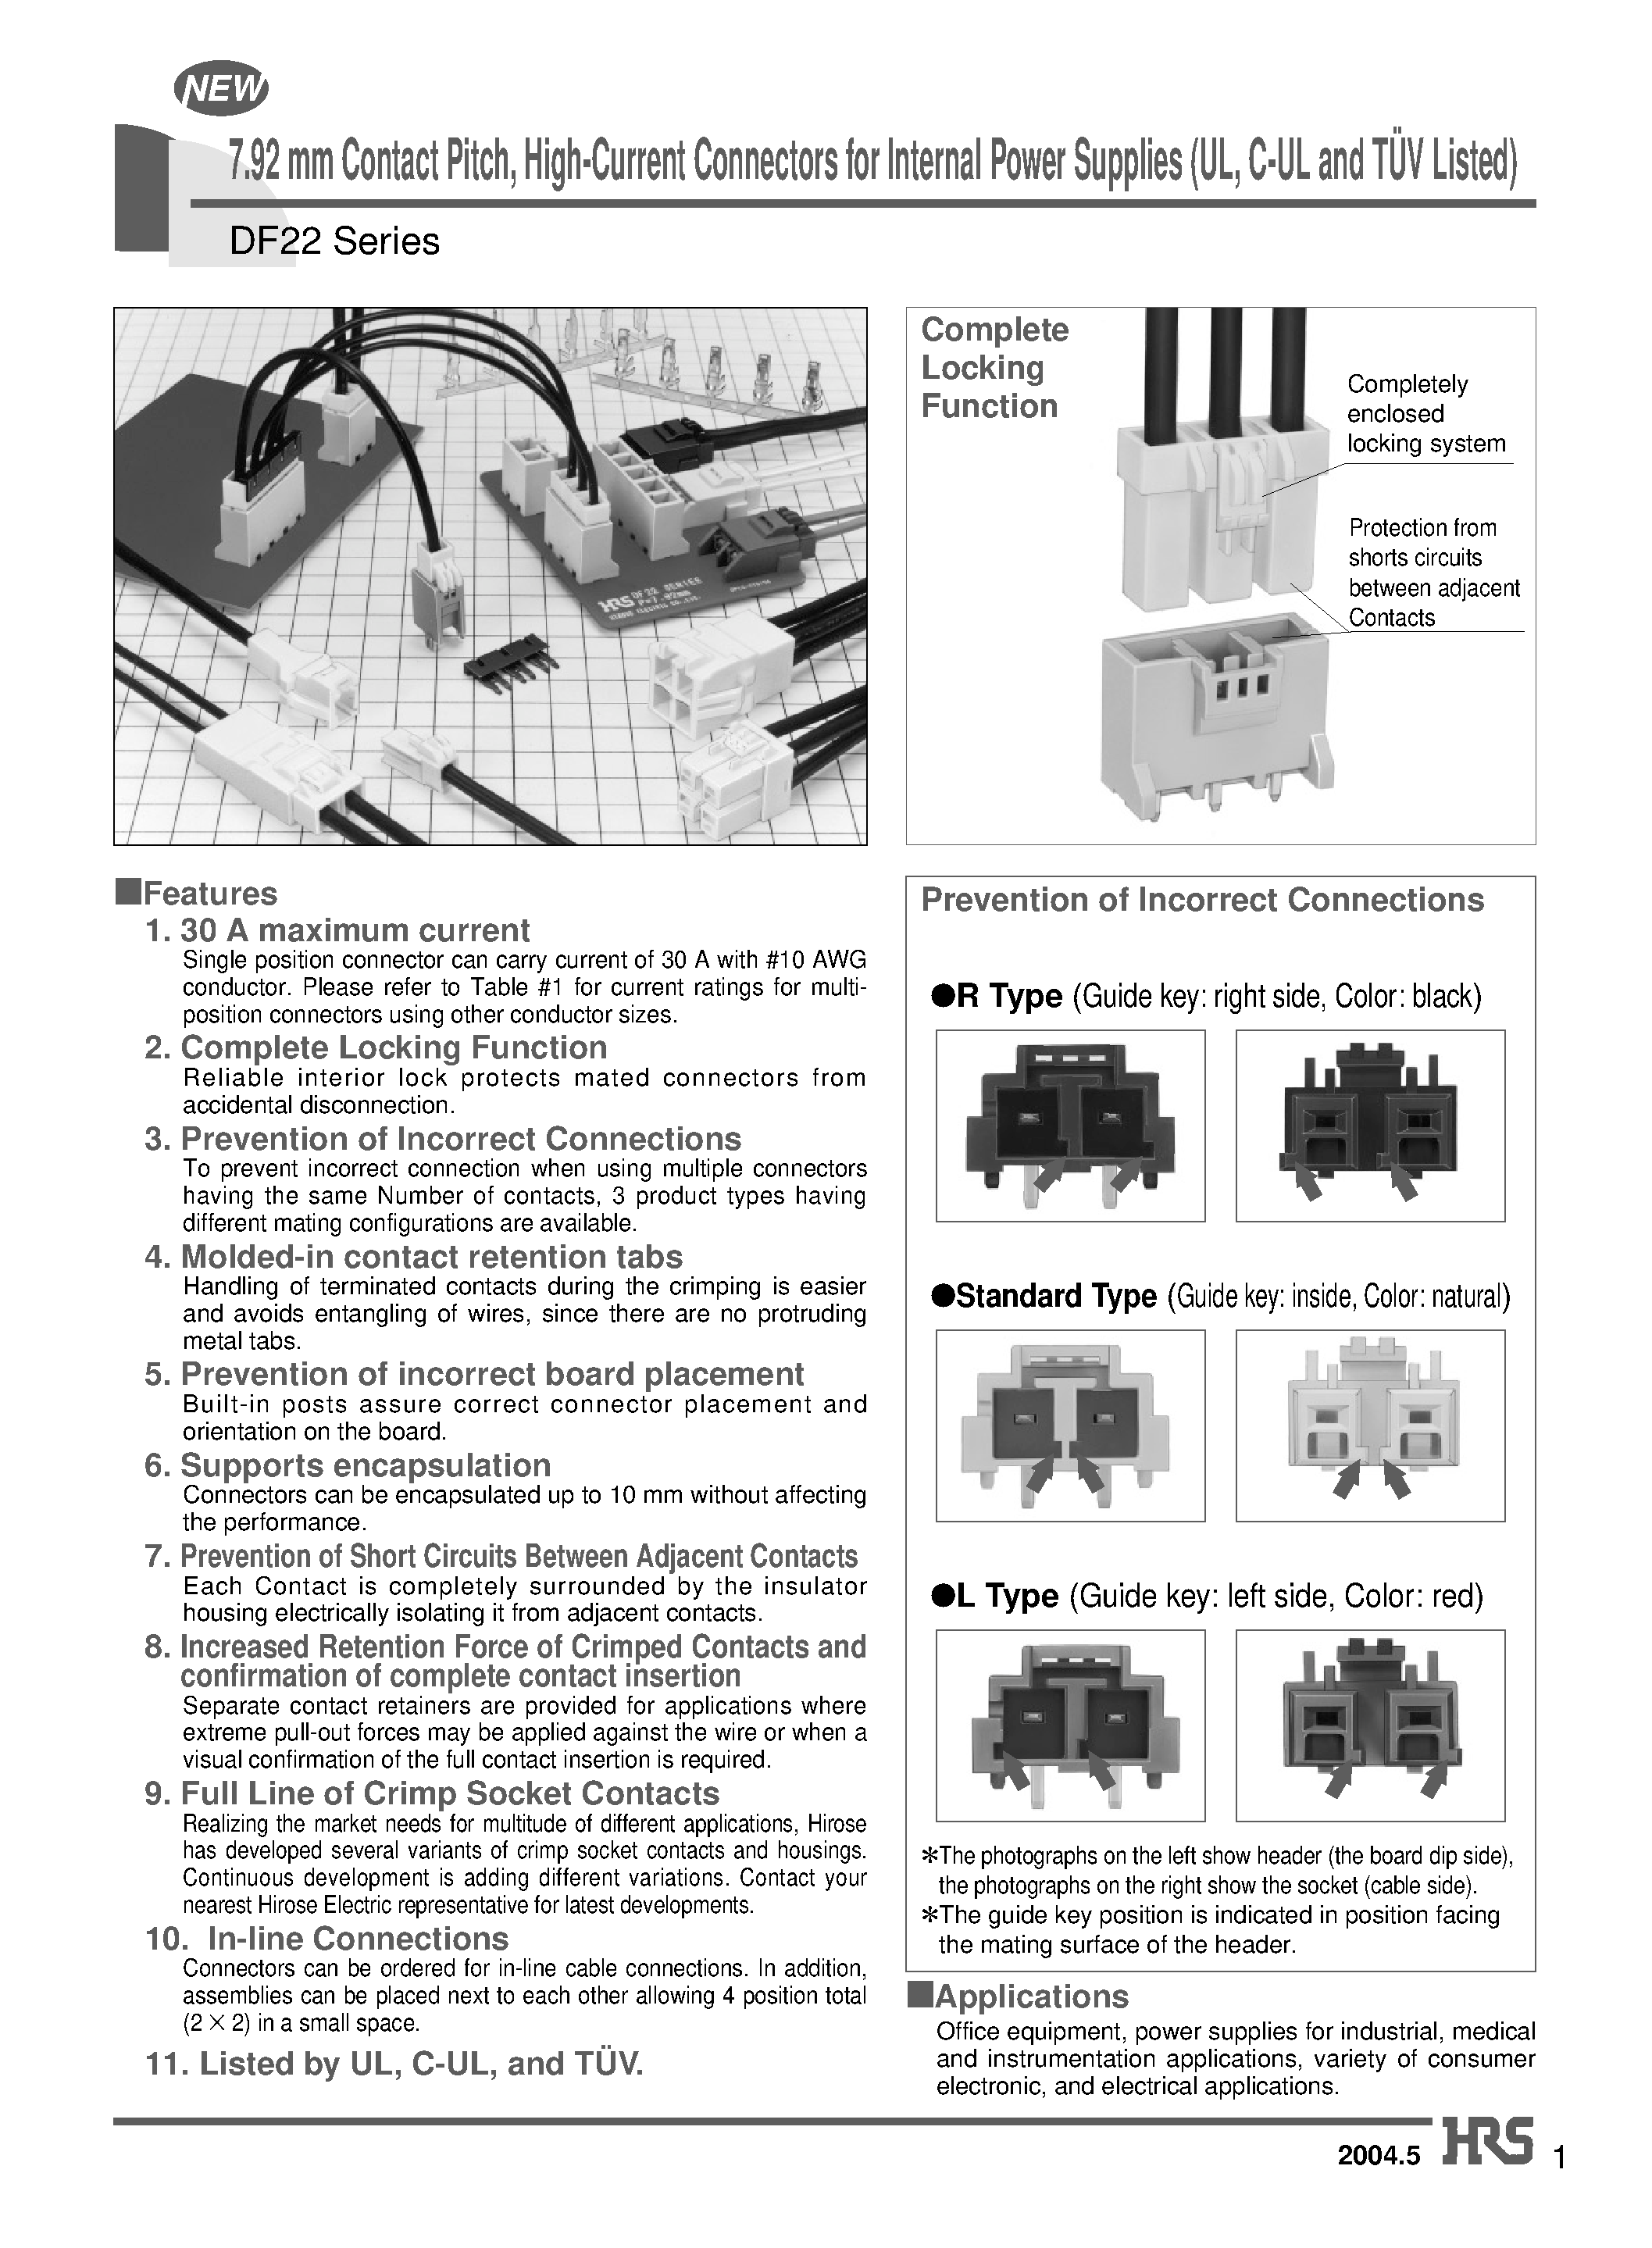 Даташит DF22AL-1P-7.92C - 7.92 mm Contact Pitch/ High-Current Connectors for Internal Power Supplies (UL/ C-UL and TUV Listed) страница 1